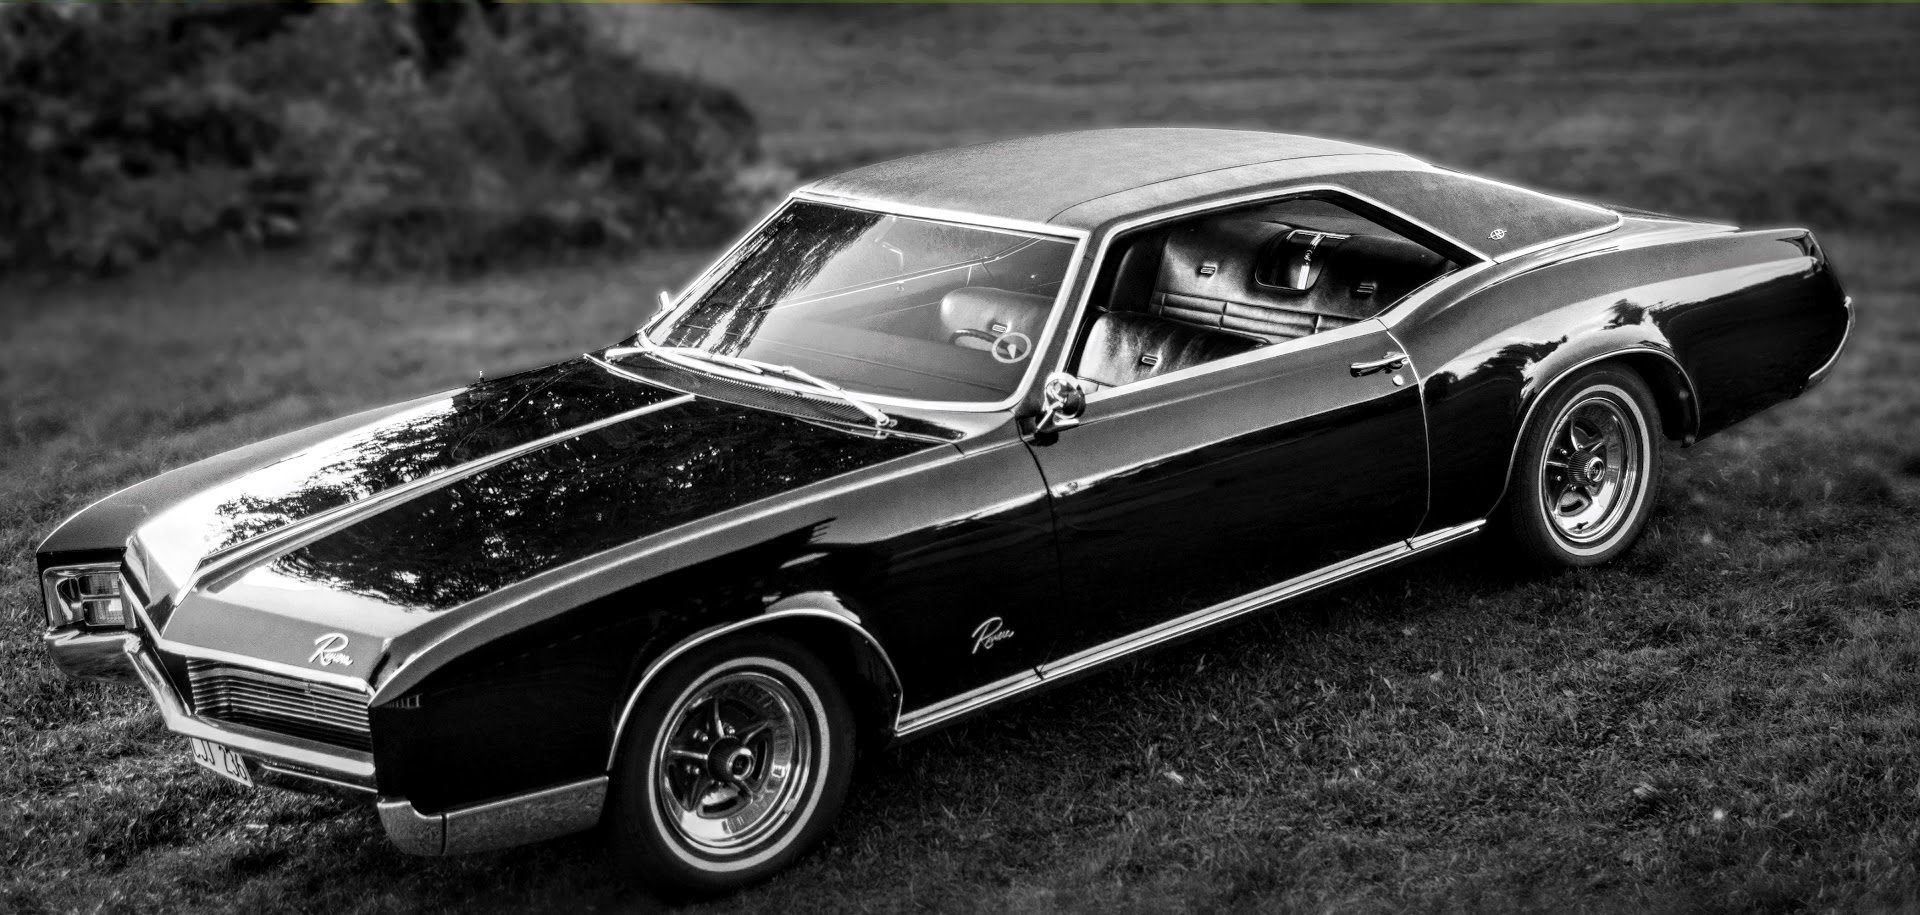 1967 Buick Riviera Pics, Vehicles Collection